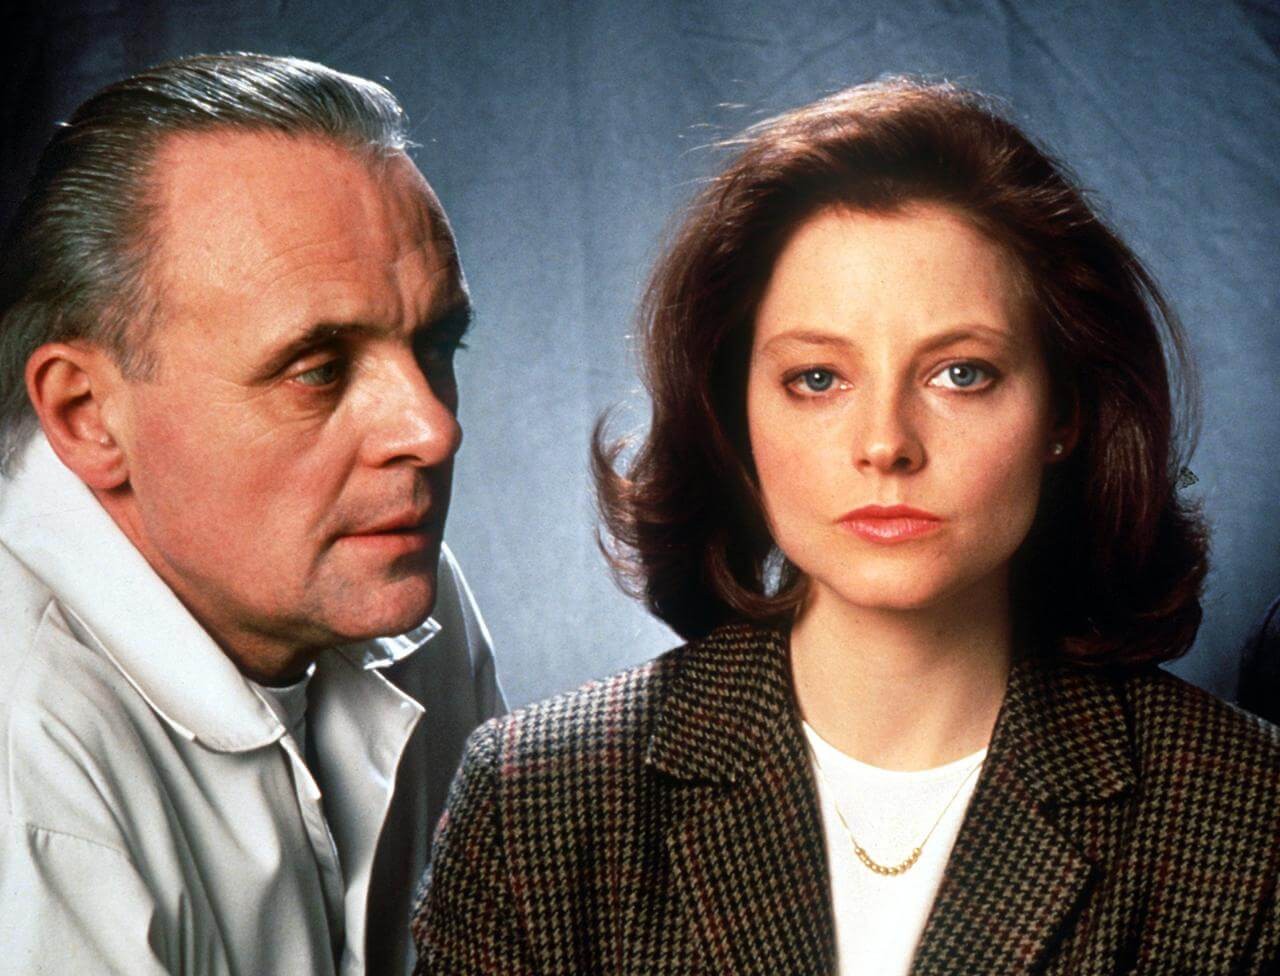 Jodie Foster and Anthony Hopkins in Silence of the Lambs 